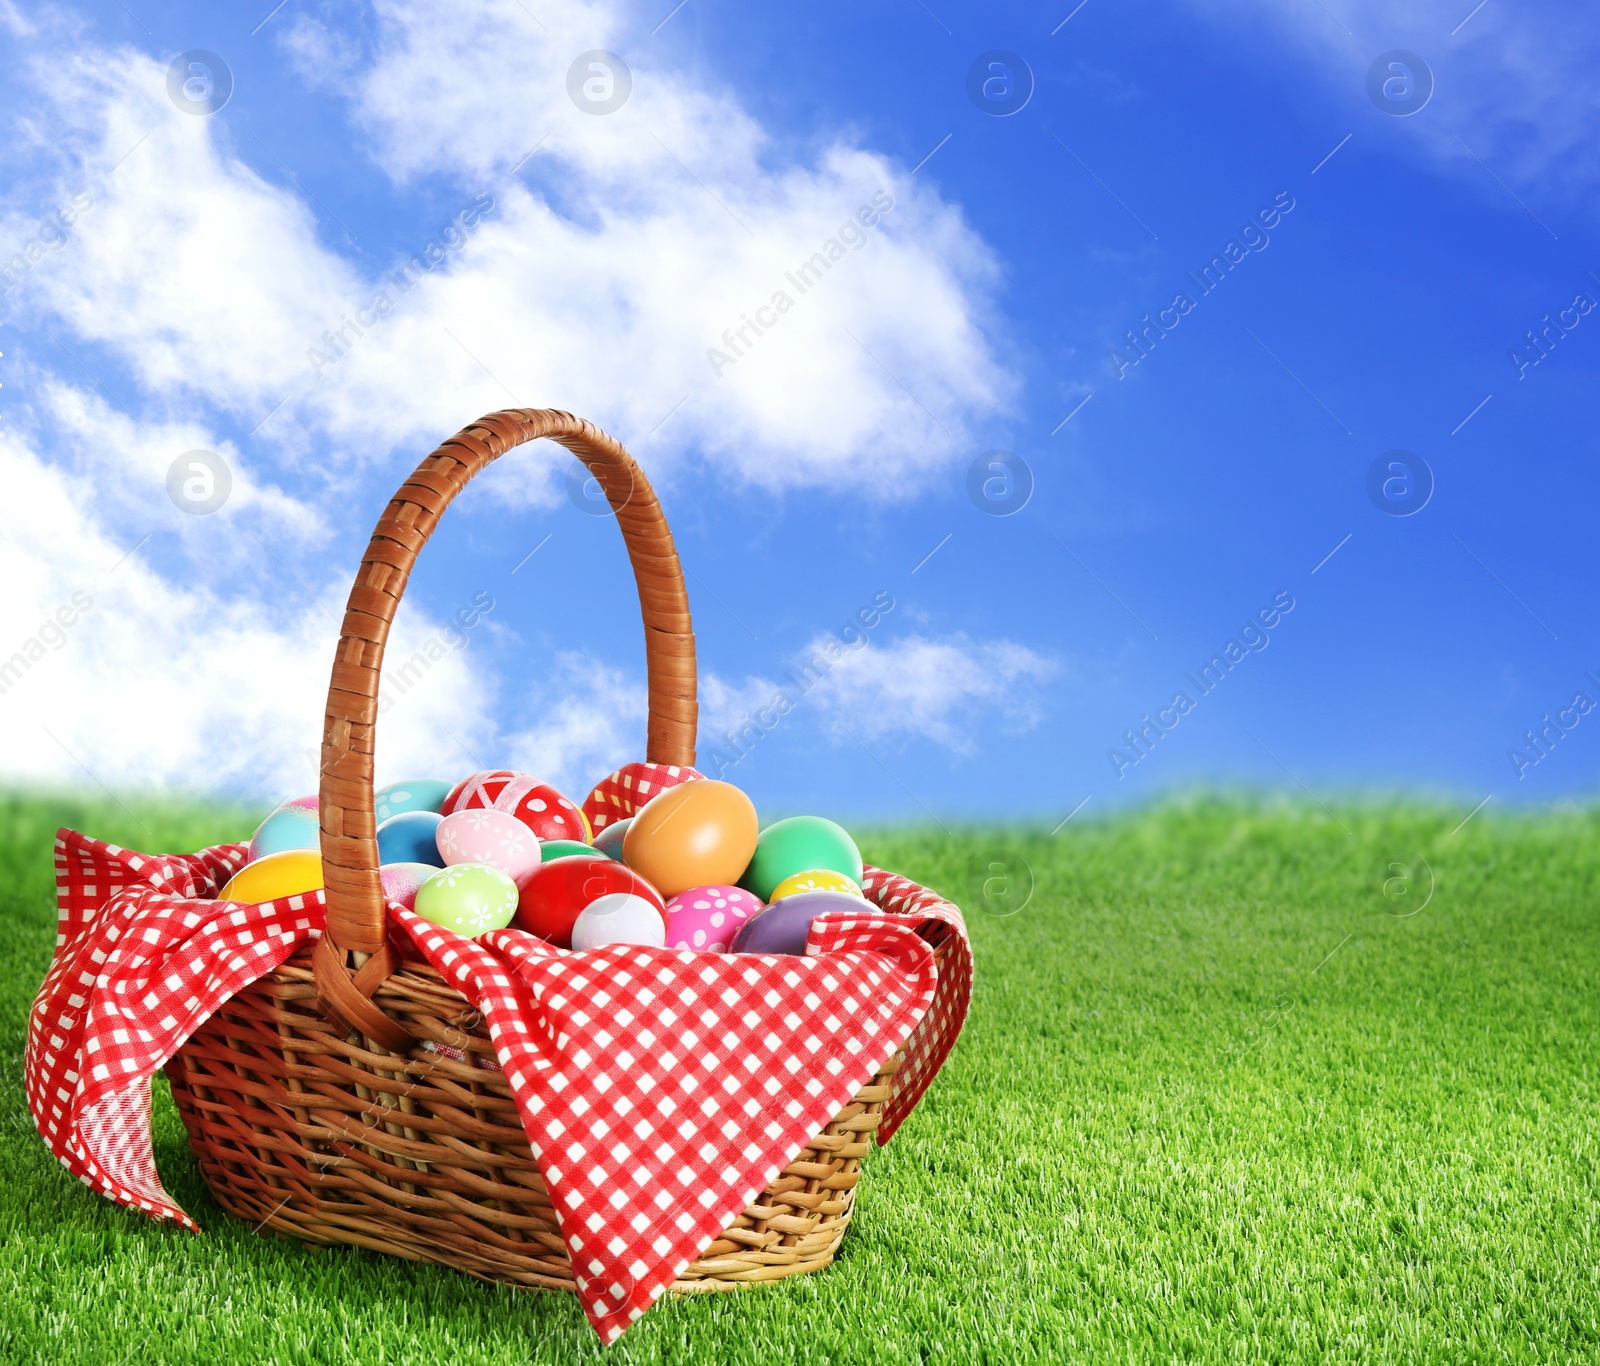 Image of Wicker basket with Easter eggs on green grass outdoors, space for text